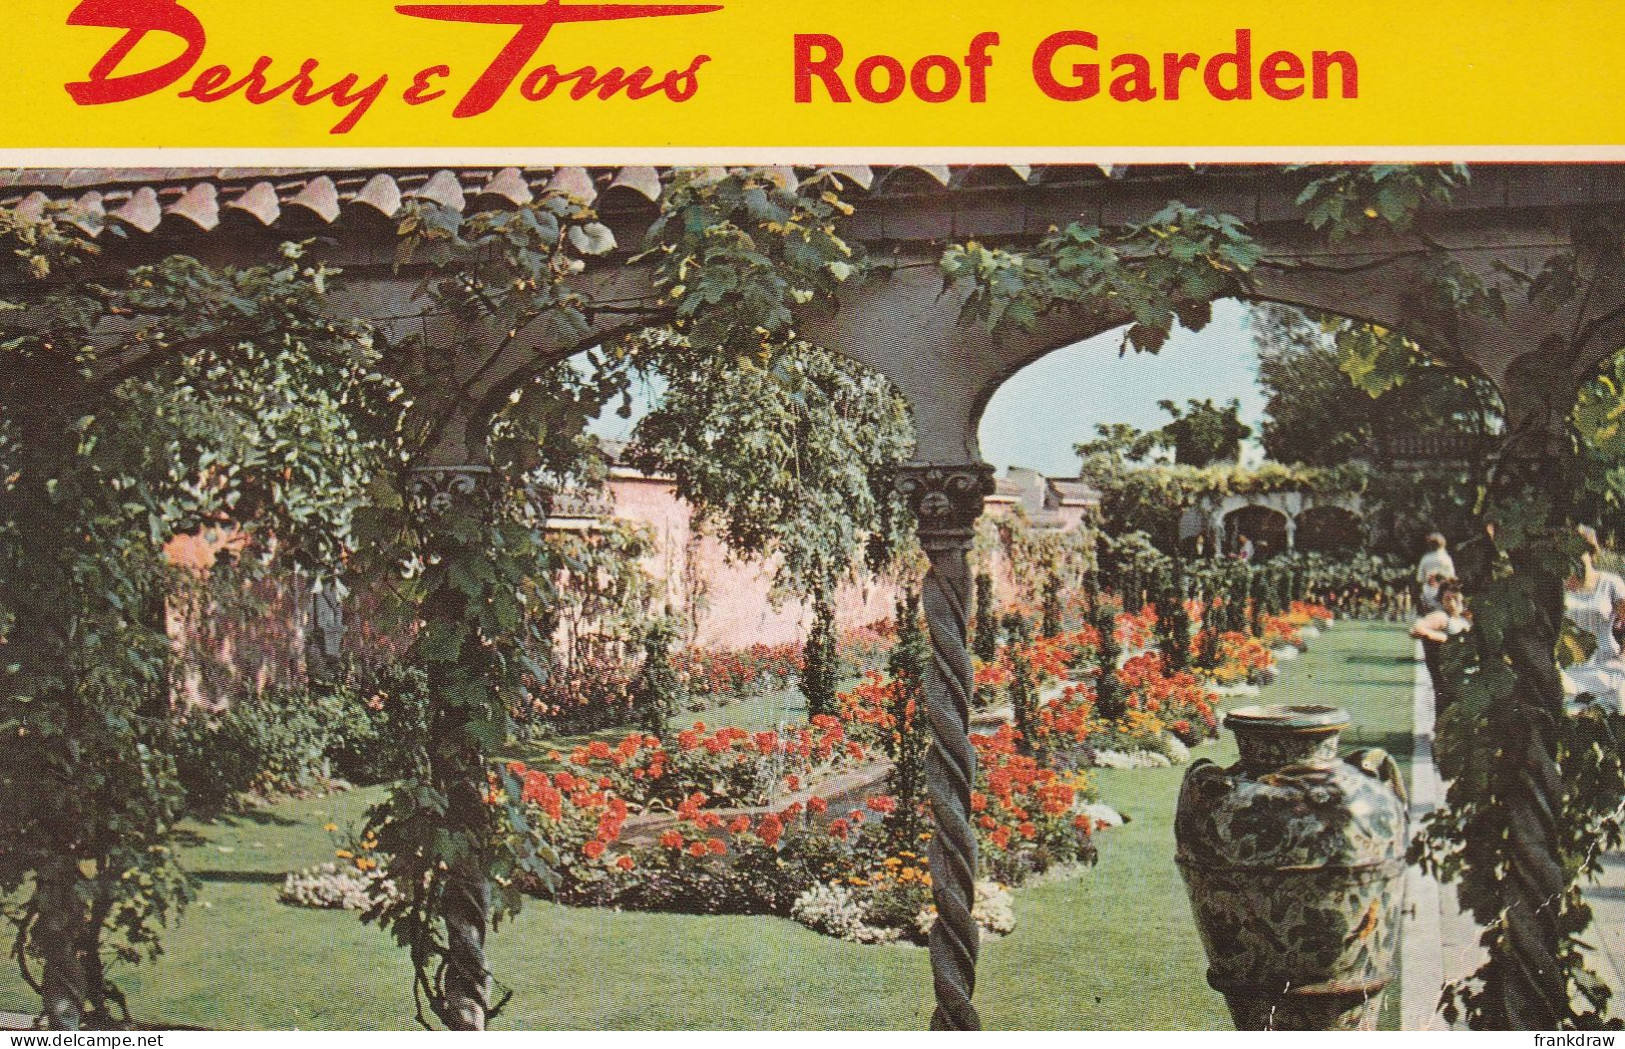 Postcard - Kensington, London - Derry And Tom's Roof Garden - Vine Covered Archway  - No Card No - Very Good - Unclassified